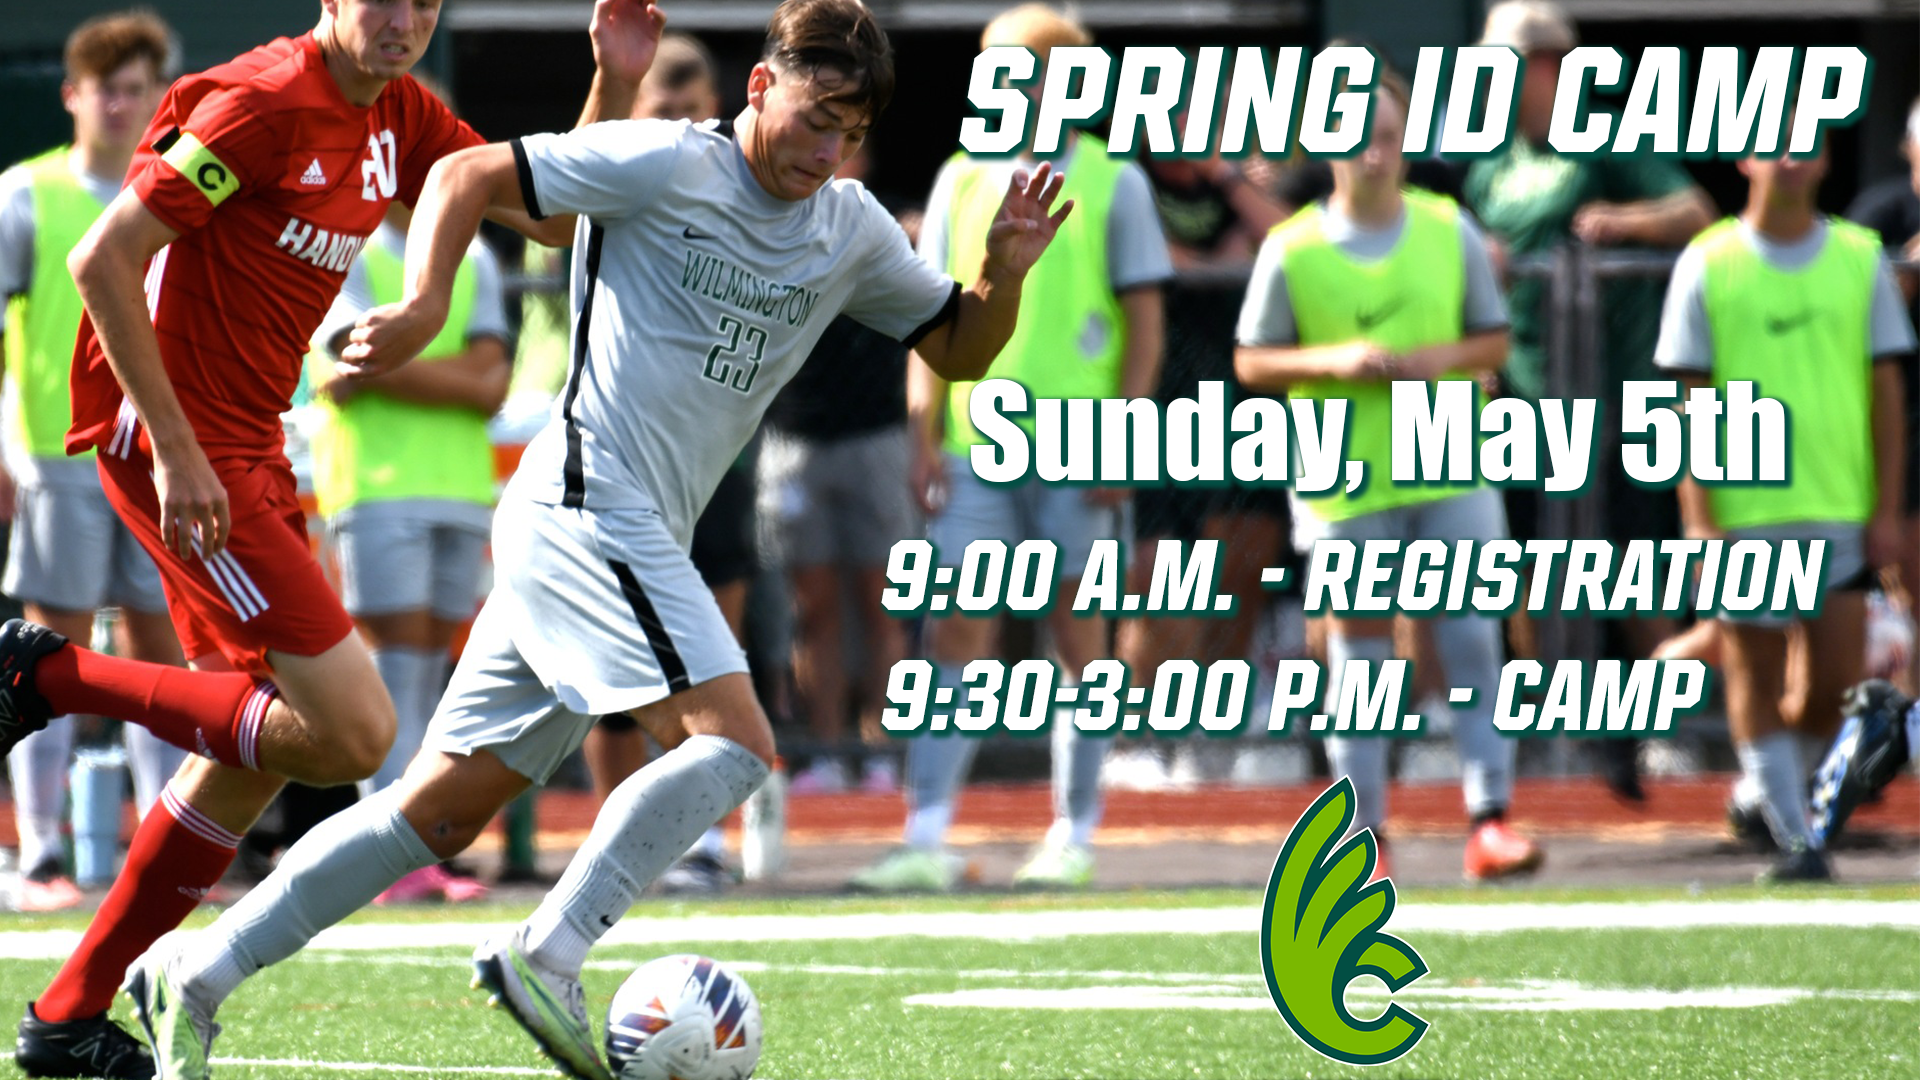 Men's Soccer Hosting ID Camp on Sunday, May 5th